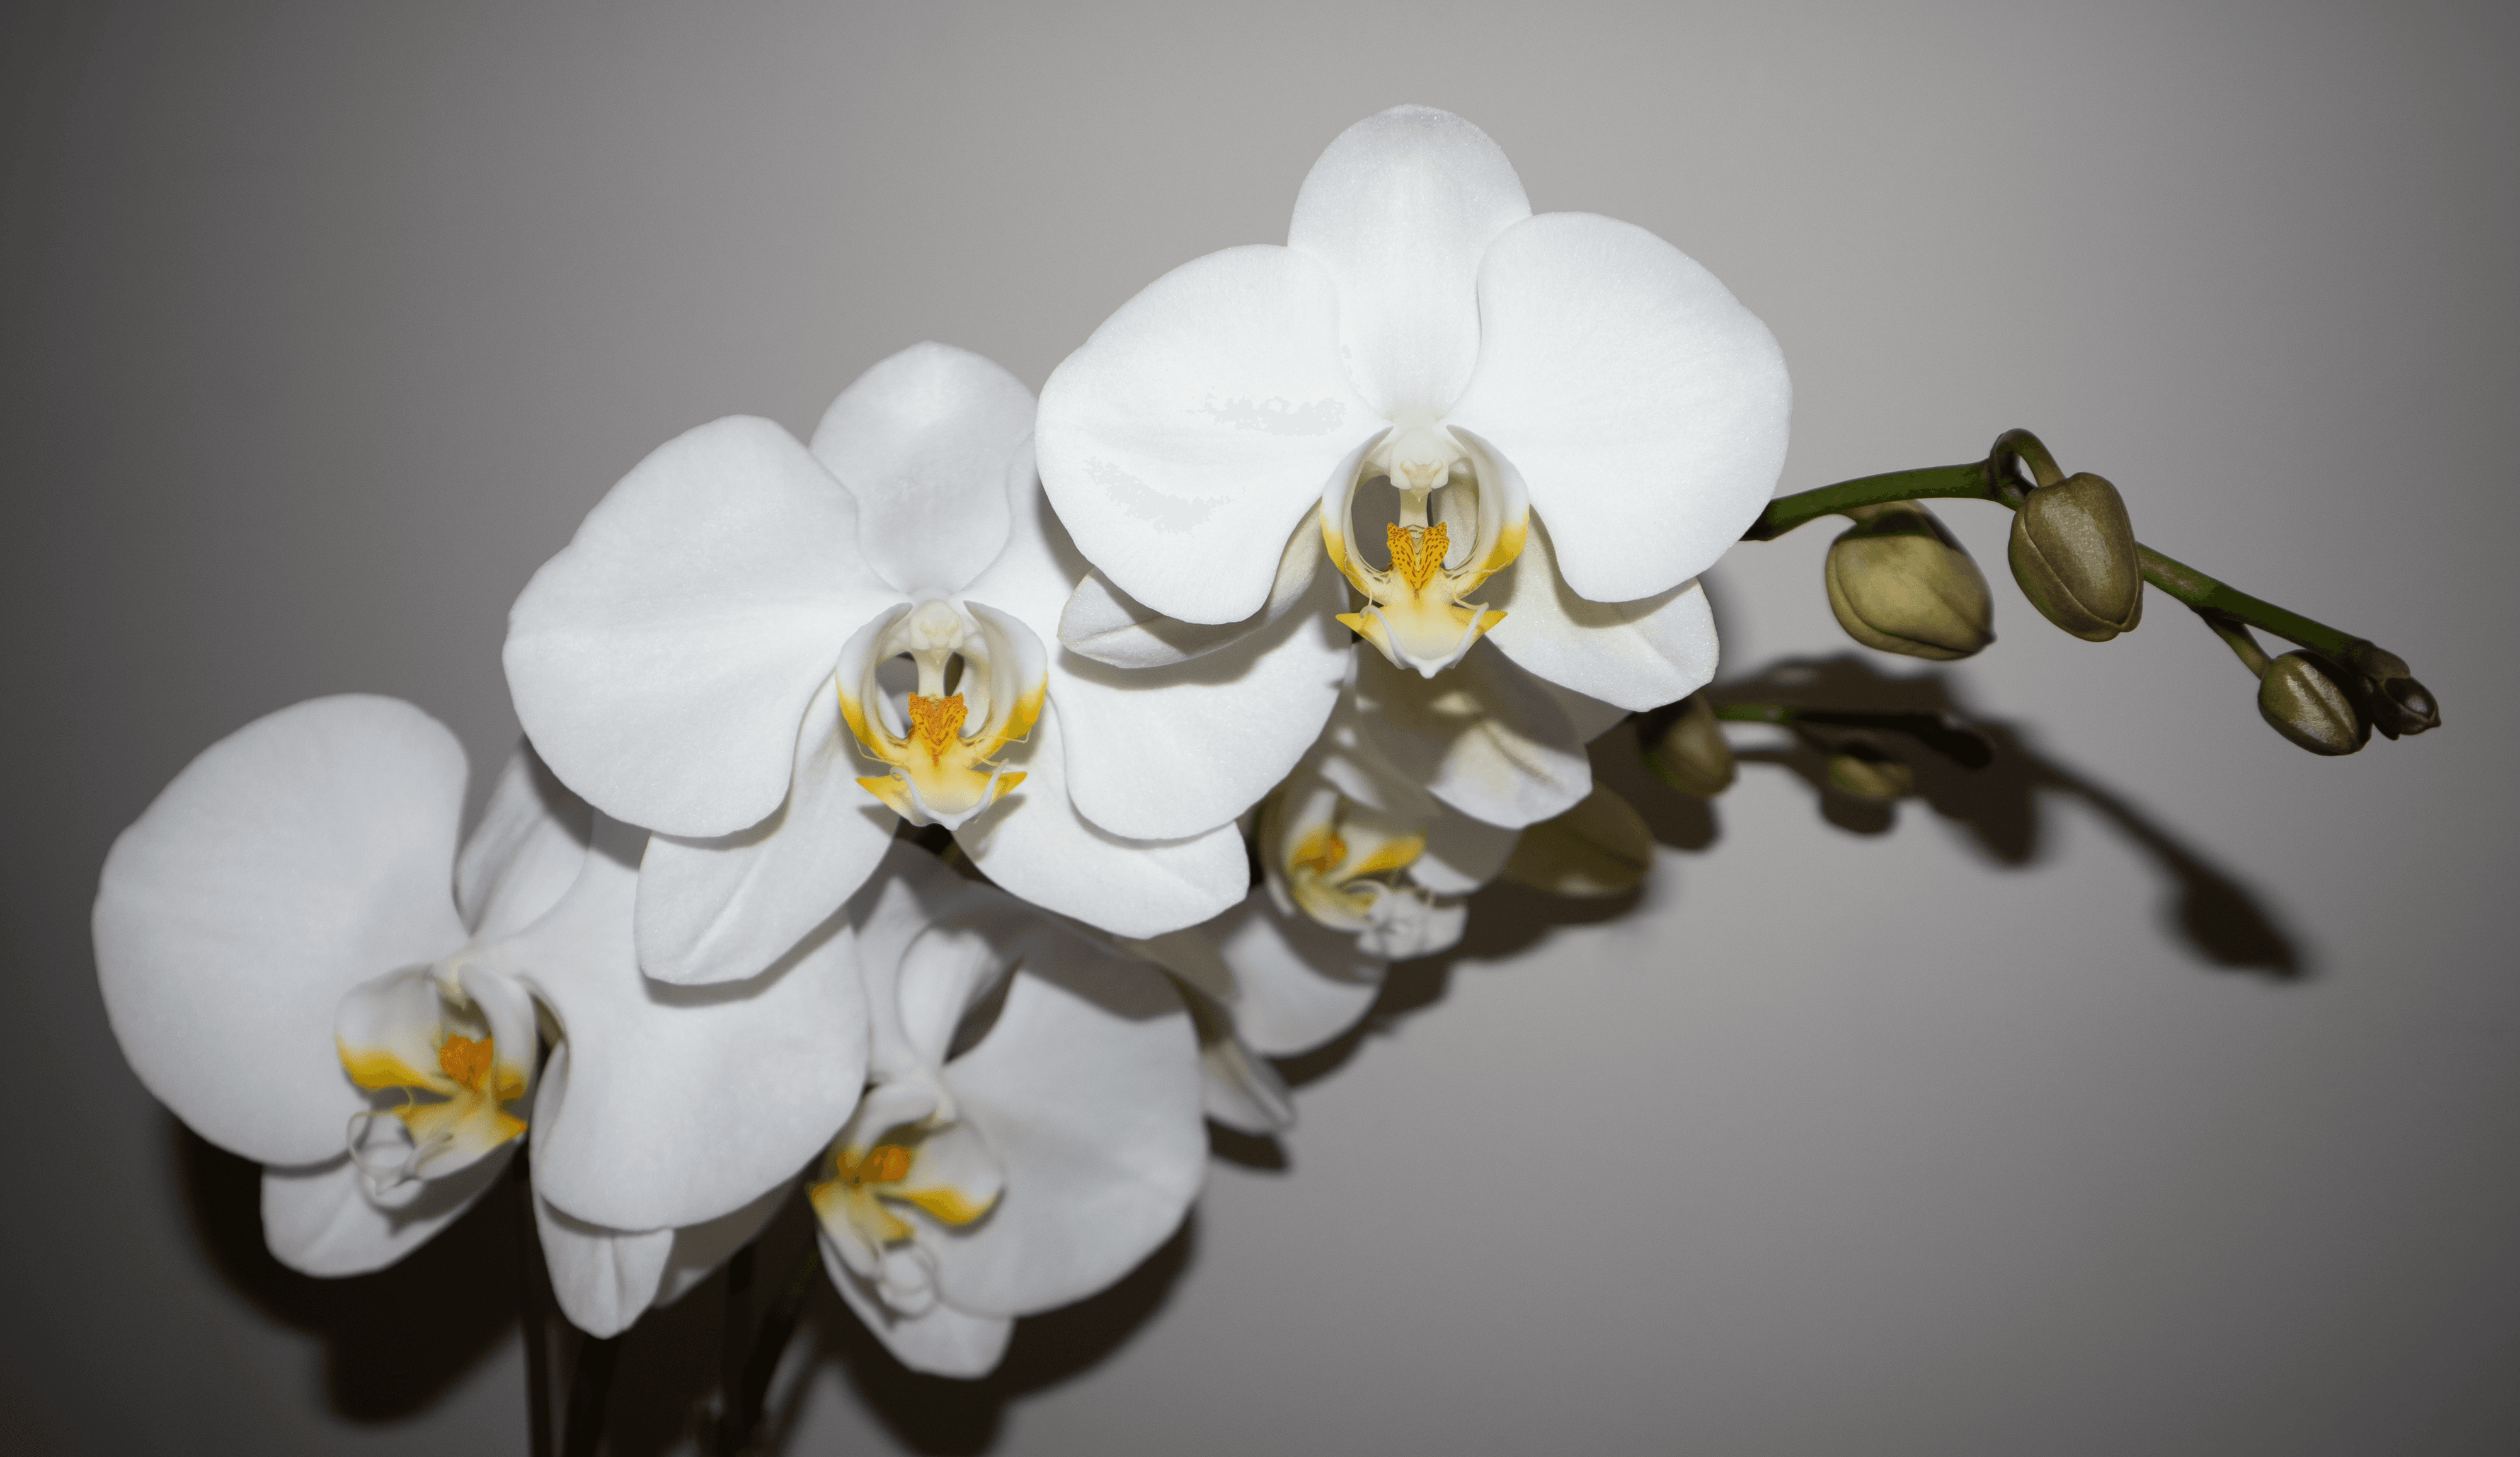 White Orchid Flower Collection 2021-001 MKW